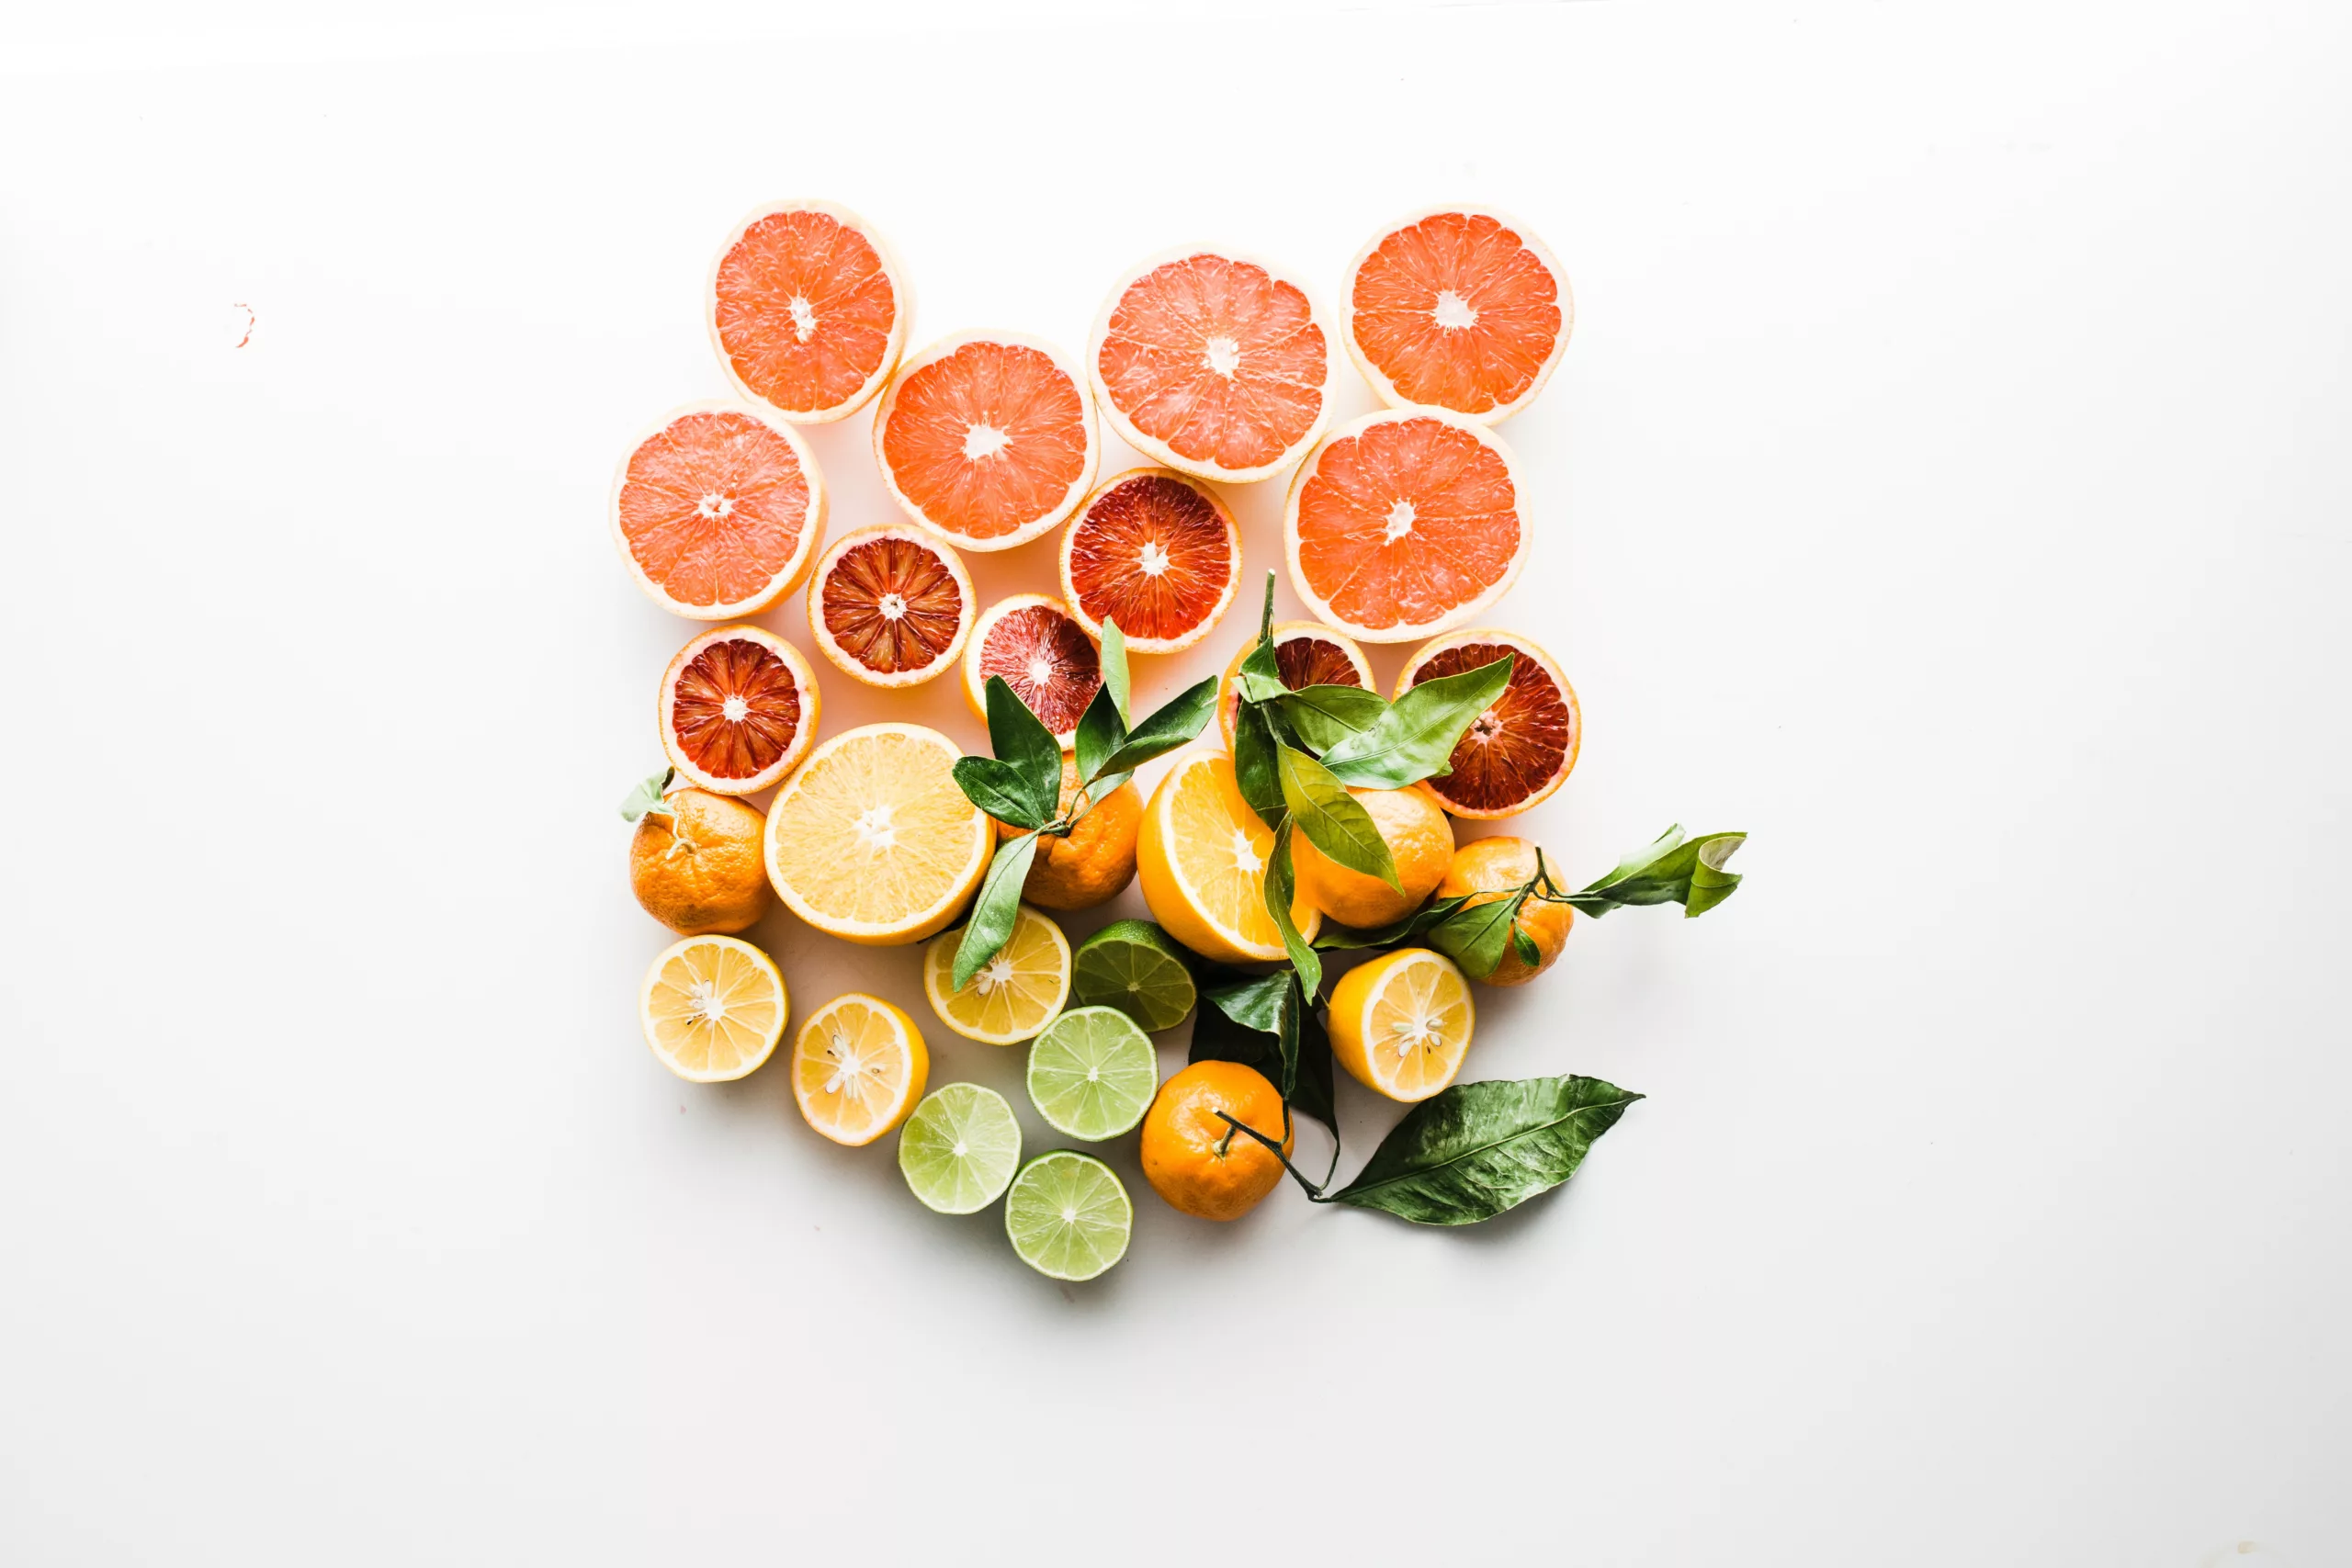 Know Your Citrus: A Field Guide to Oranges, Lemons, Limes, and Beyond